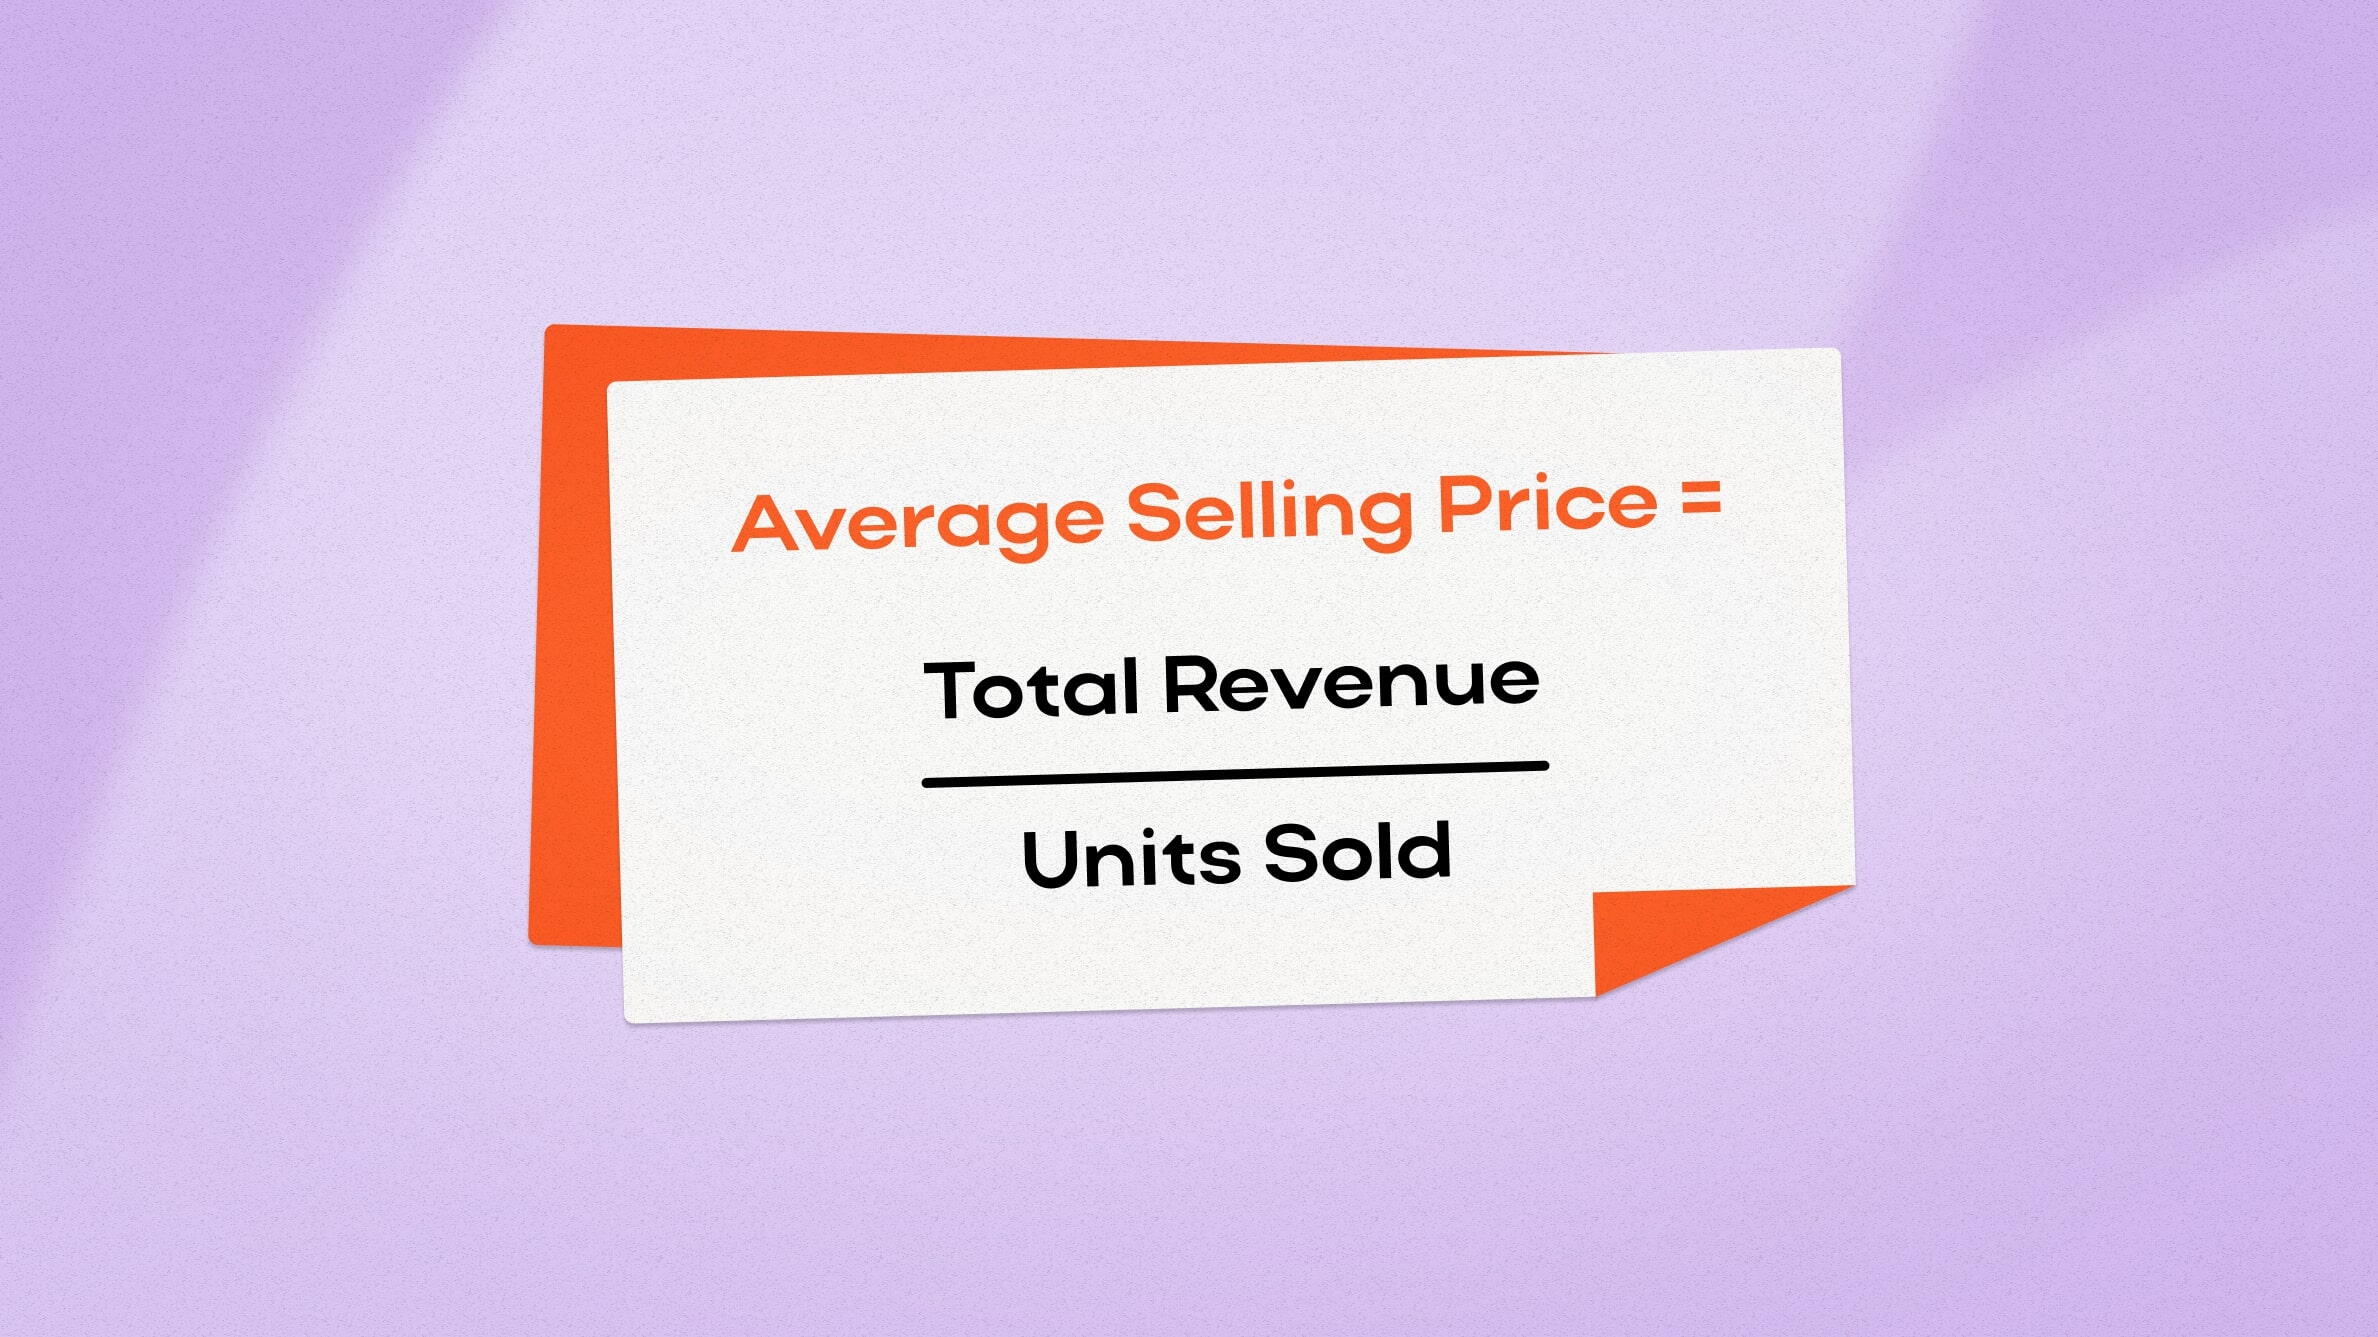 How to calculate the average selling price of an item